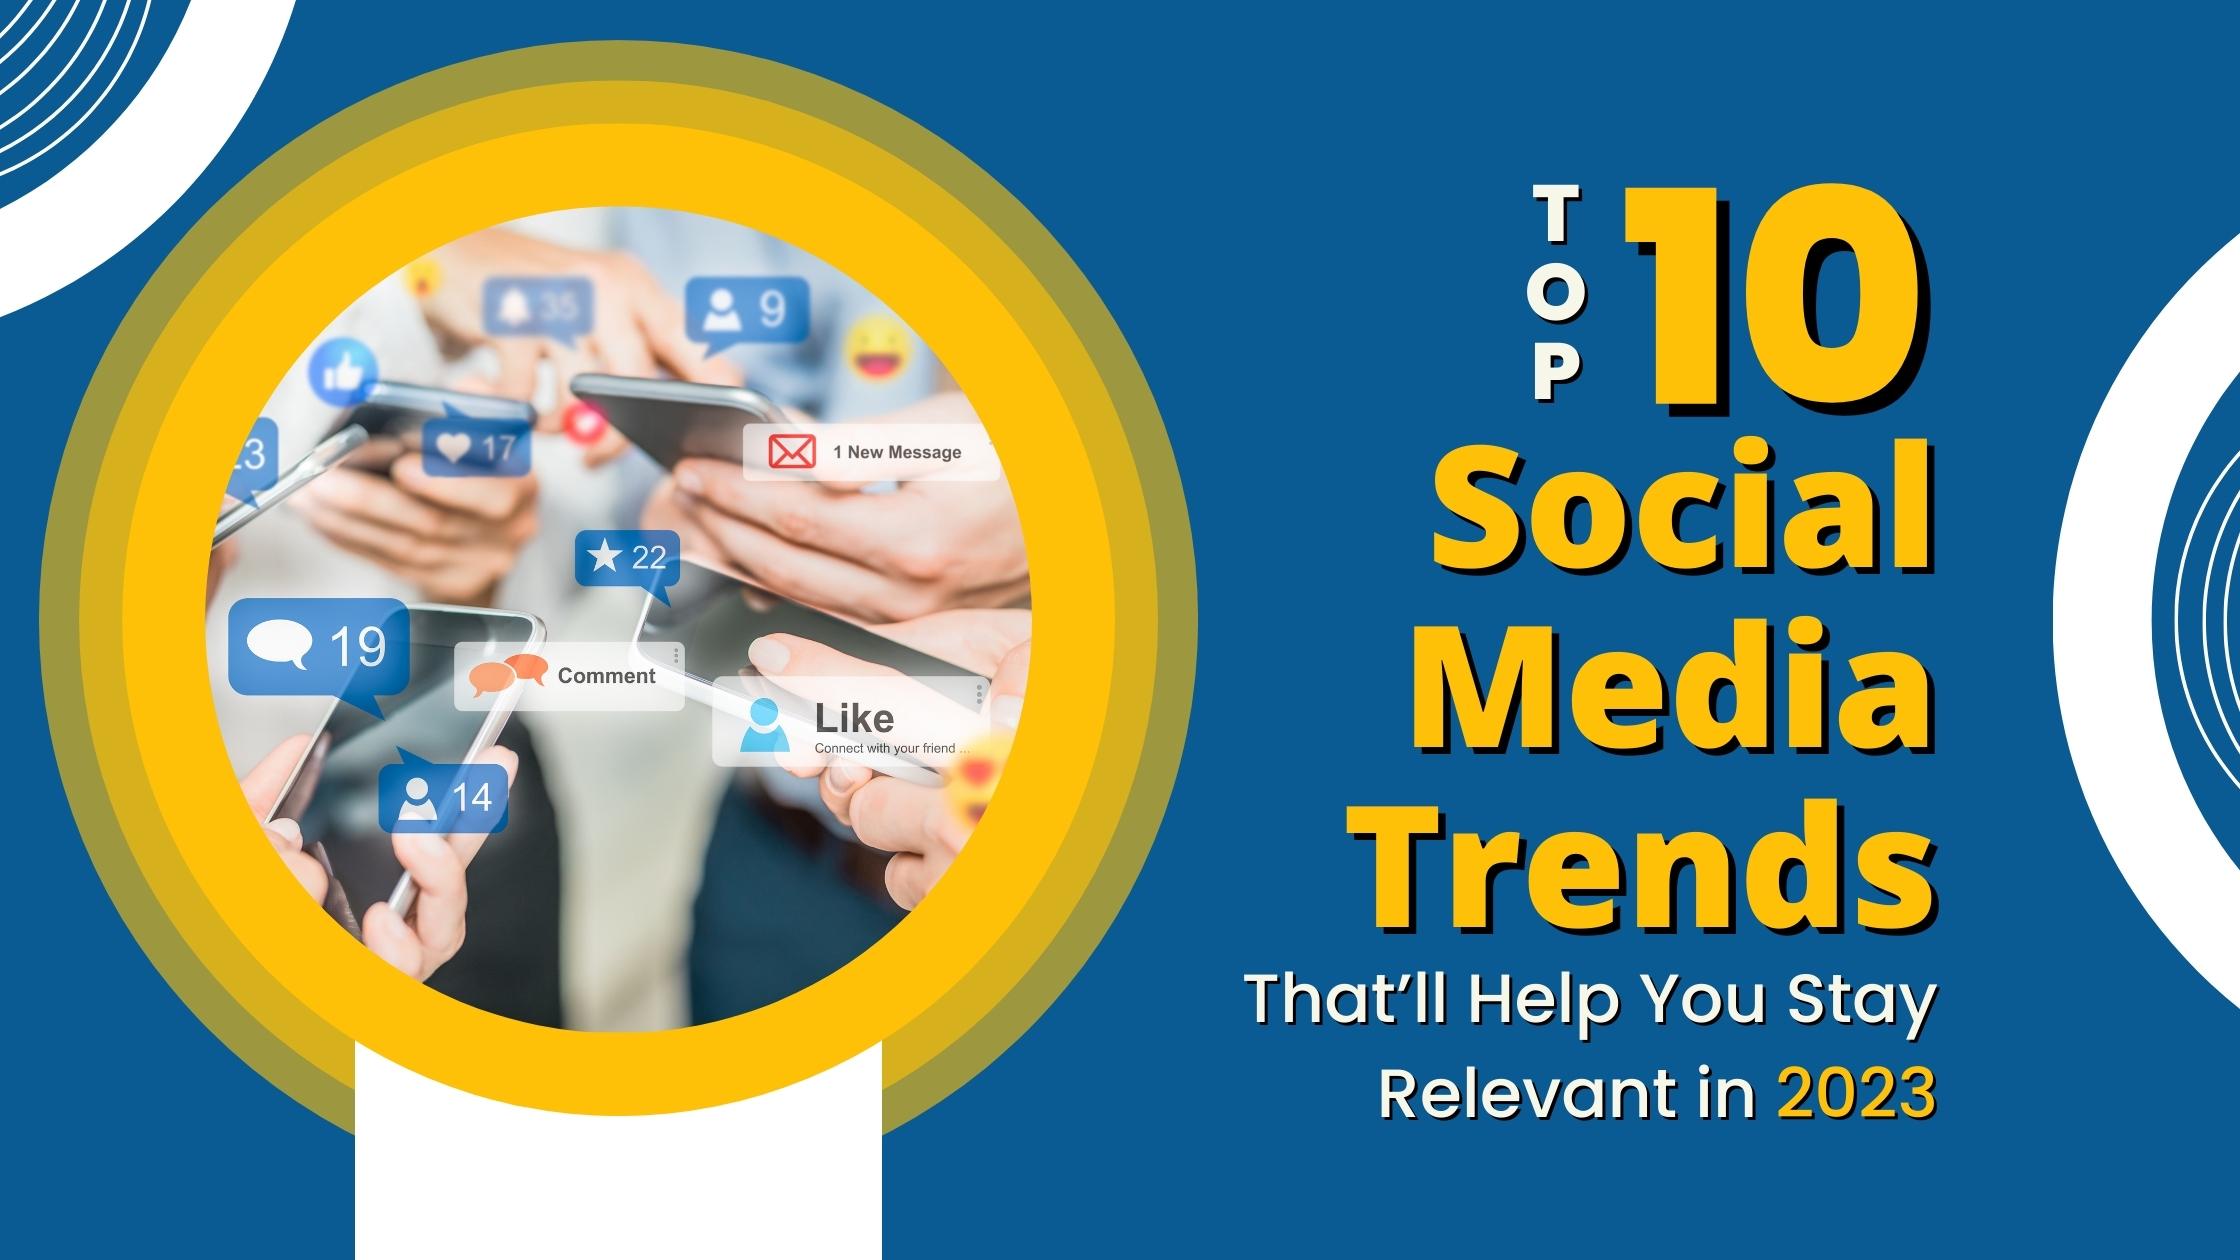 Top 10 Social Media Trends Thatll Help You Stay Relevant In 2023 